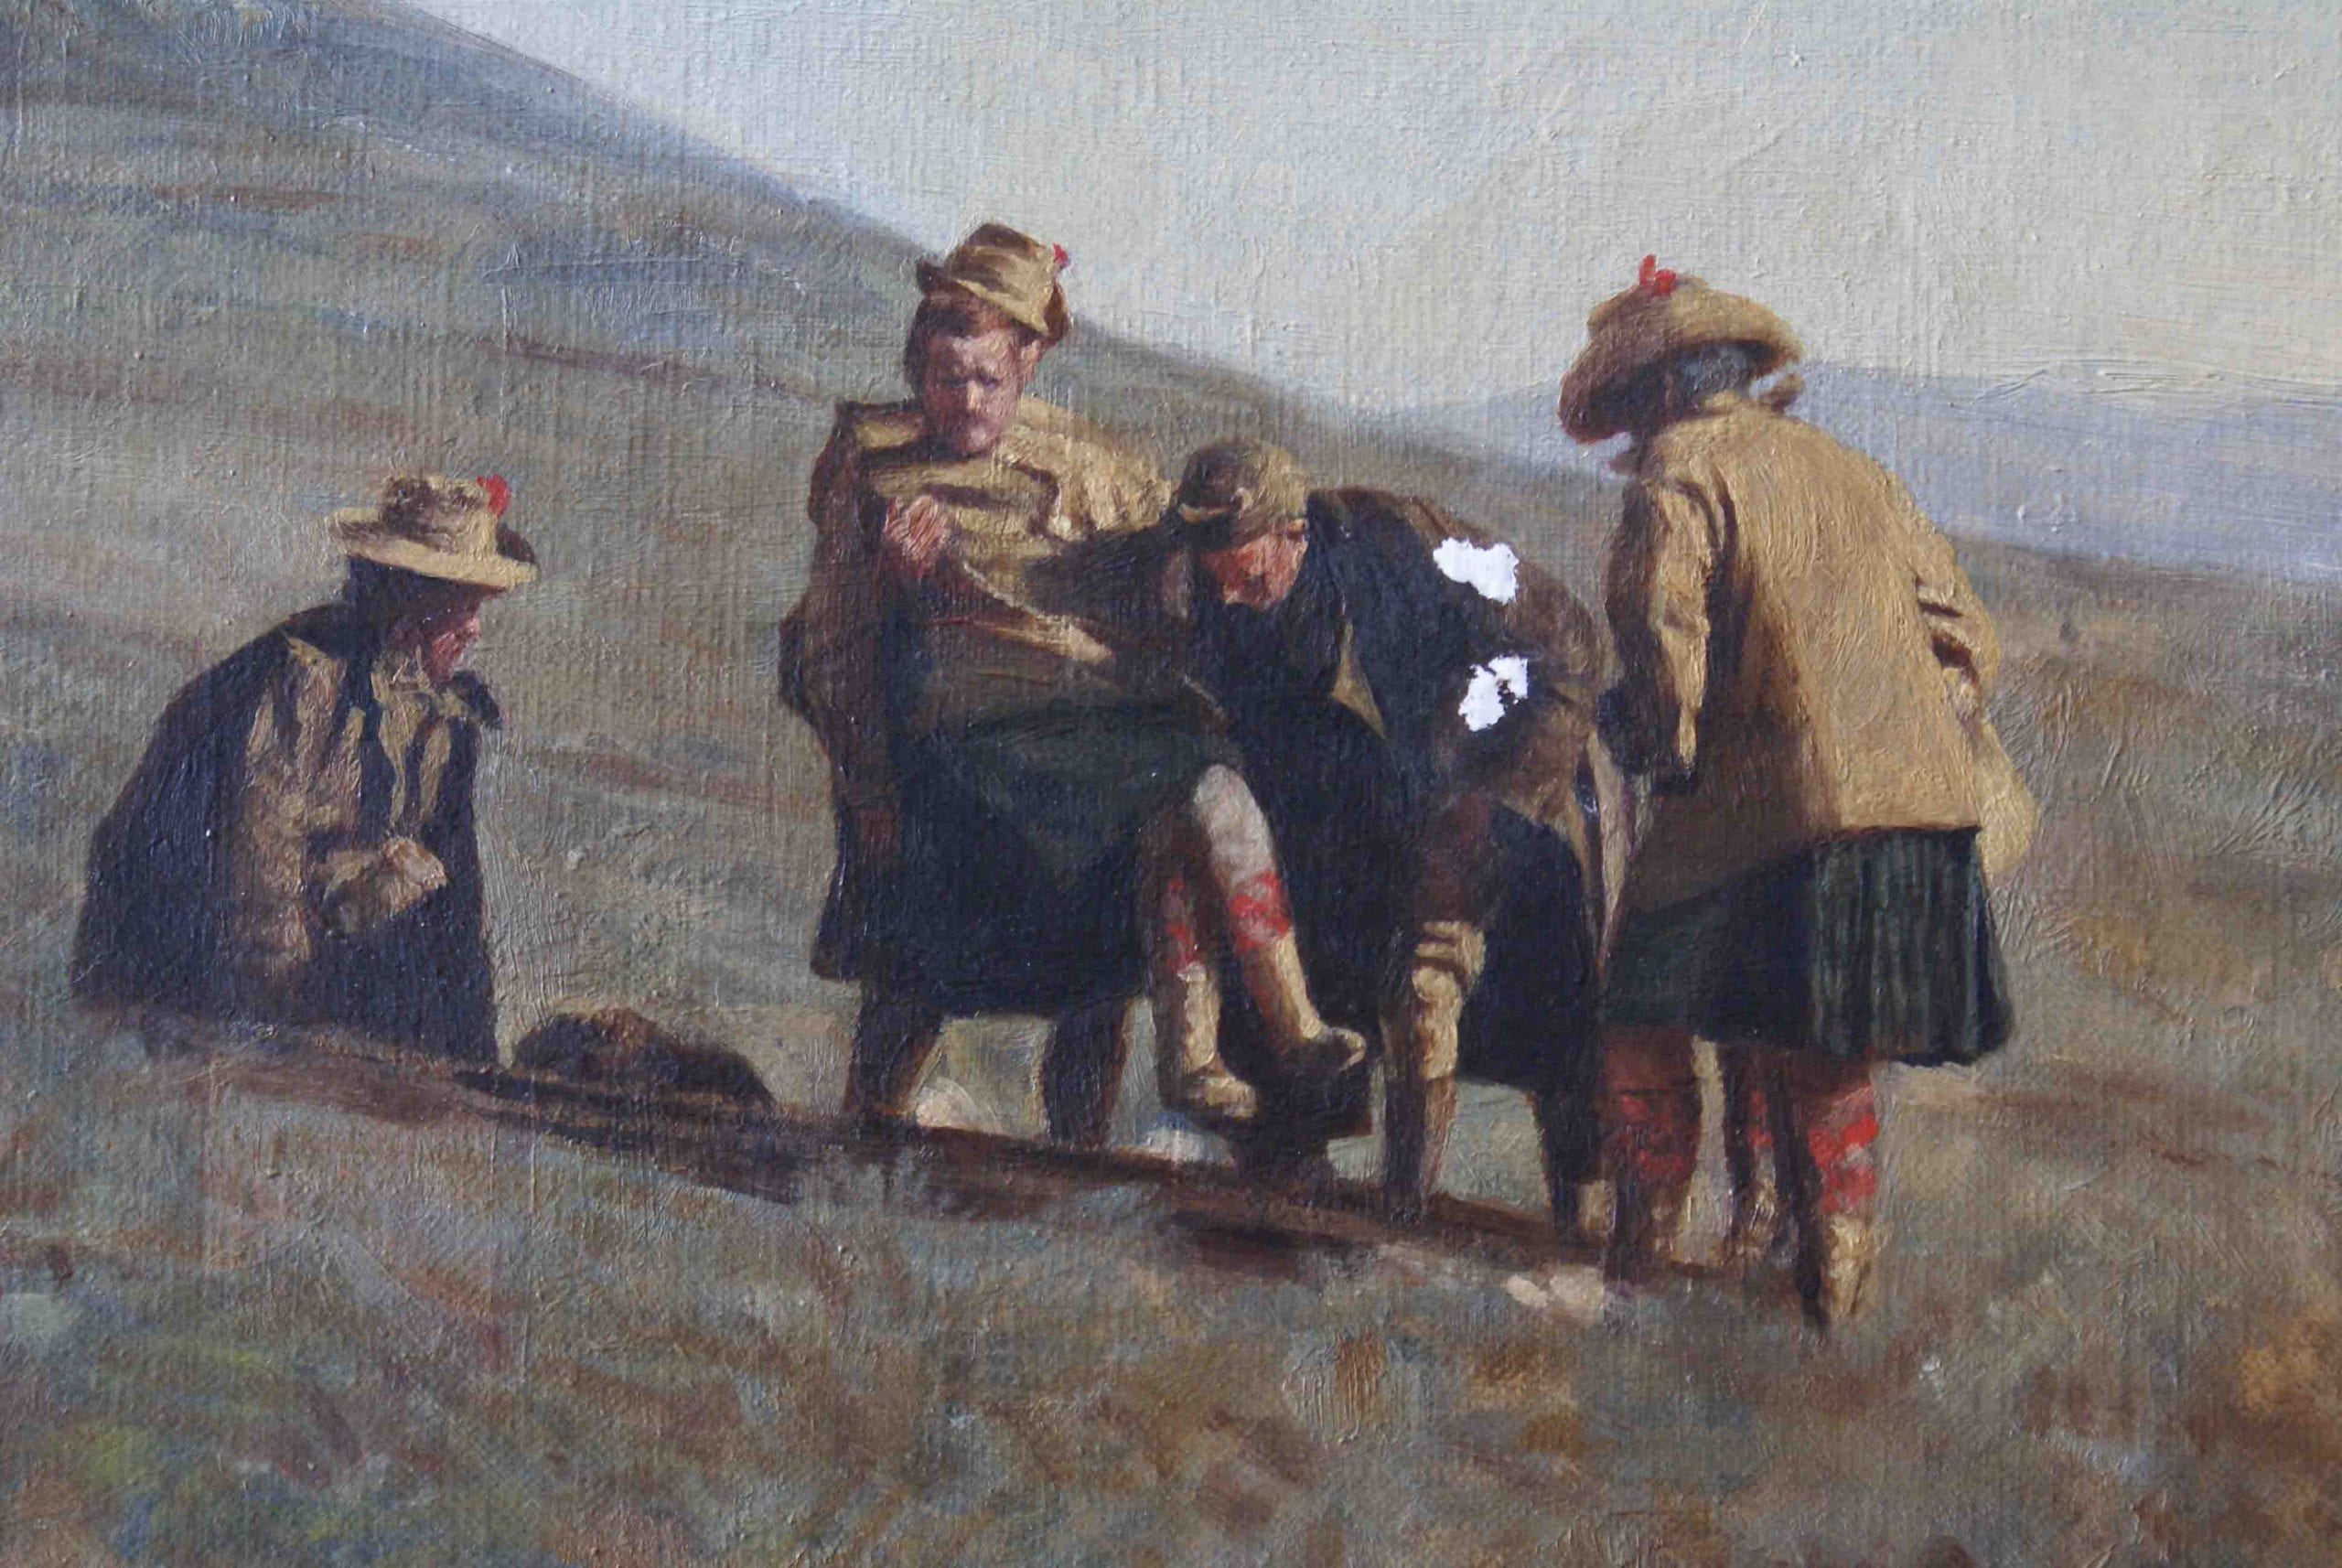 Conservation/restoration of the oil painting ‘Harry Kebel Smith in Boer War’ by Jennett Collins